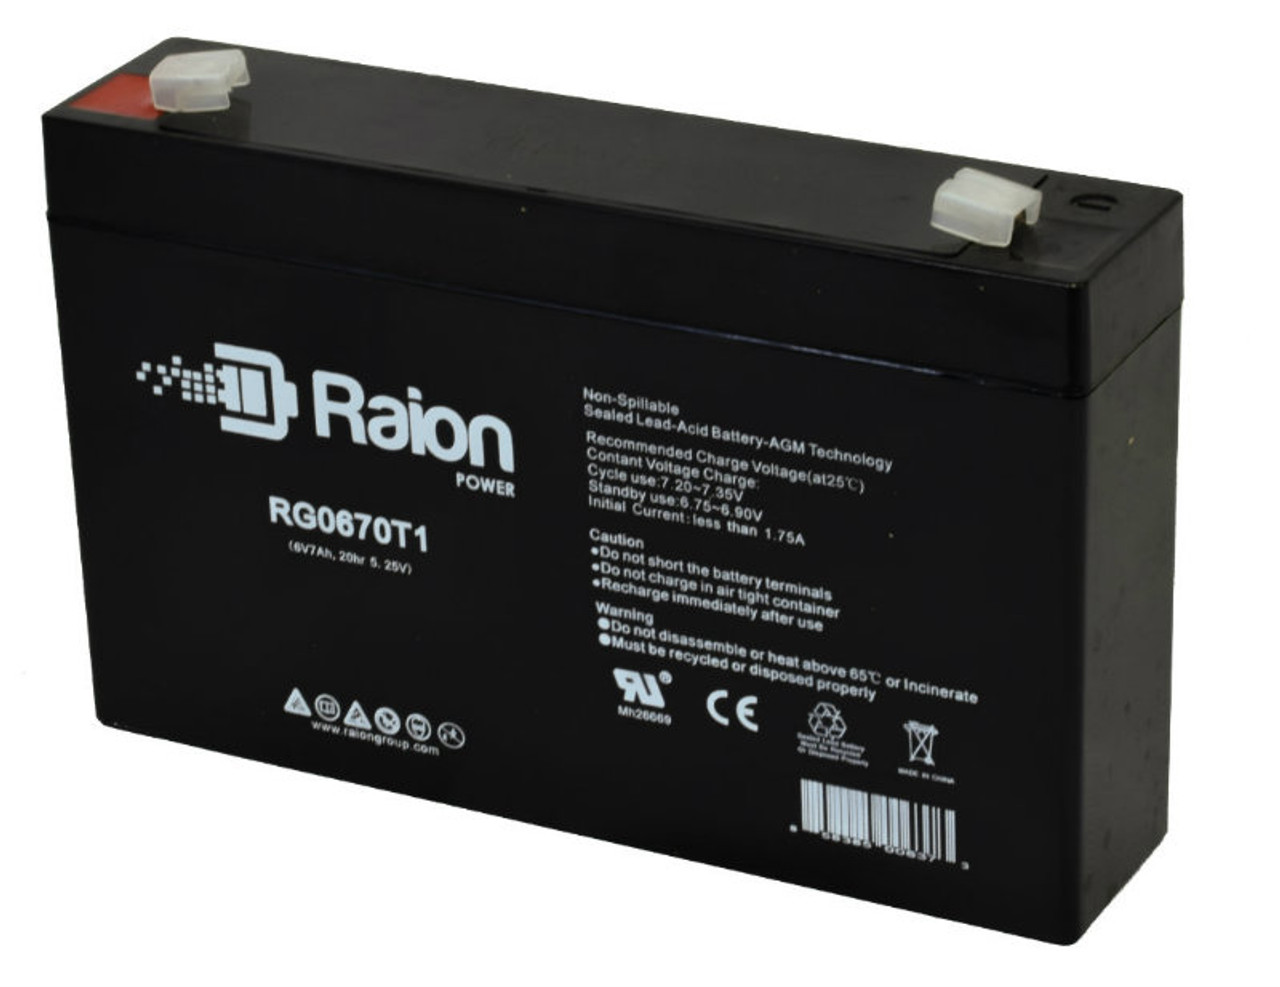 Raion Power RG0670T1 6V 7Ah Replacement Emergency Lighting Battery for Lithonia ELB-0607